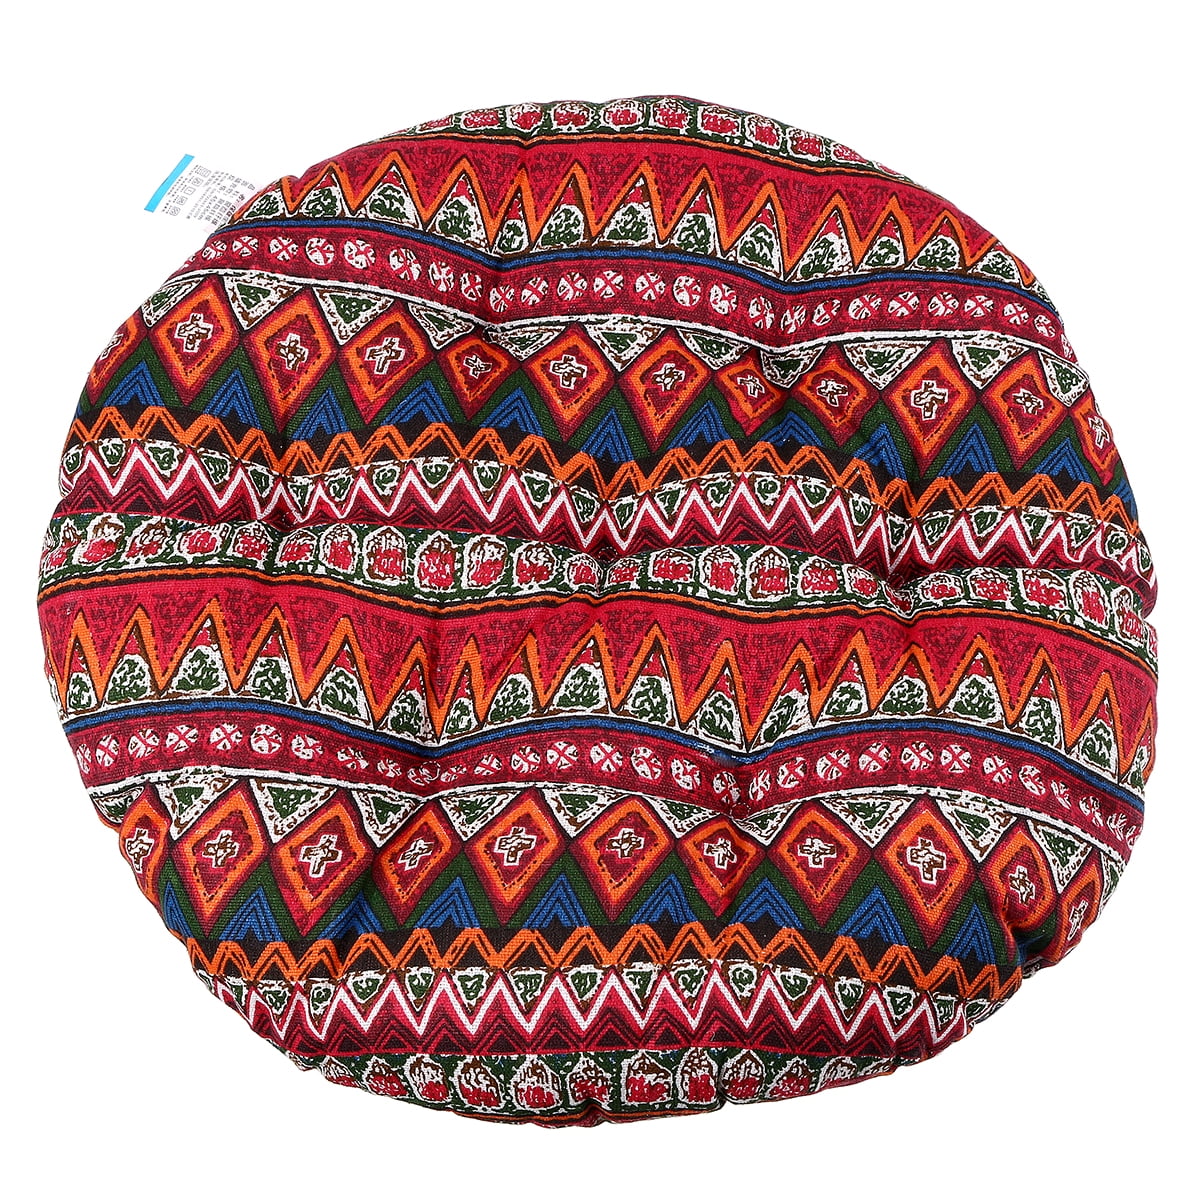 4Pack 18x18 inches Round Seat Cushion Nordic Style Comfortable Thick ...